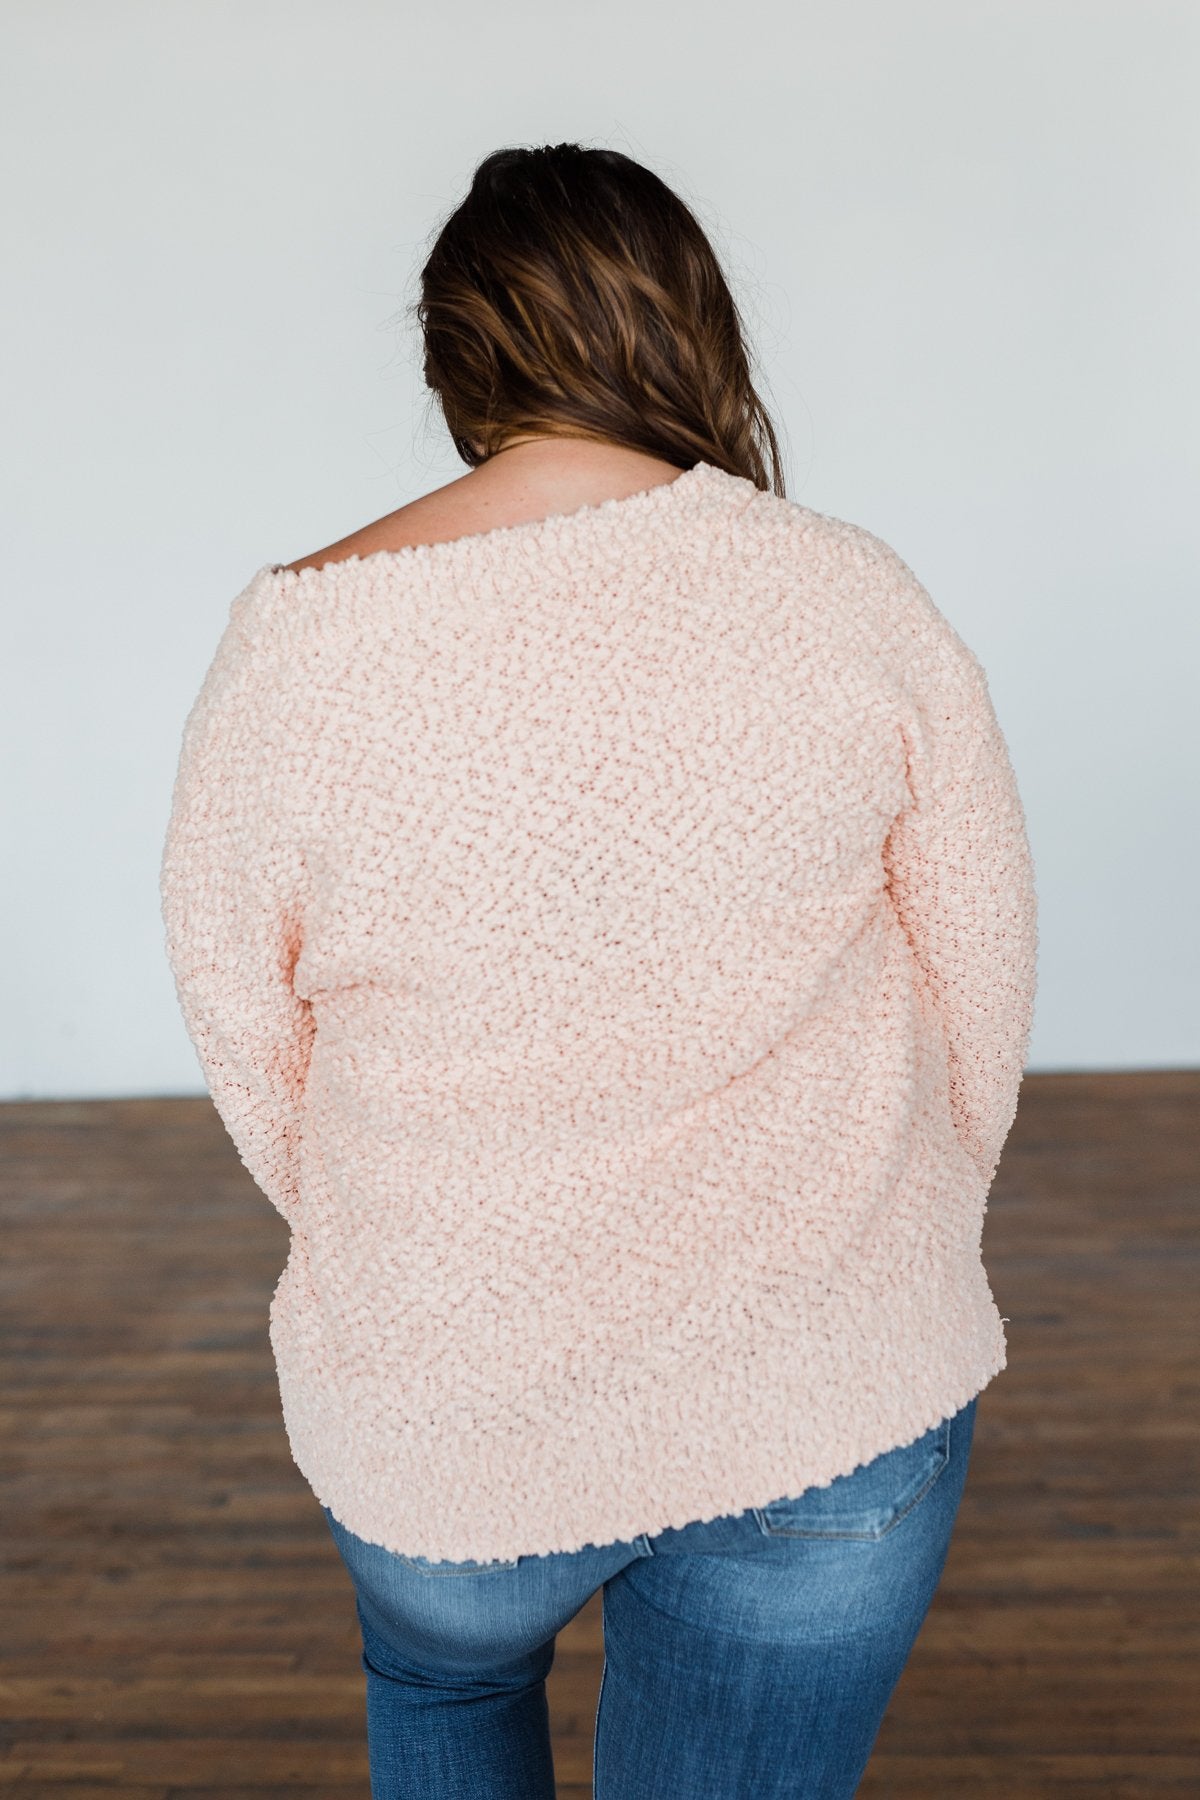 All I Can Do Popcorn Knit Sweater- Light Peach